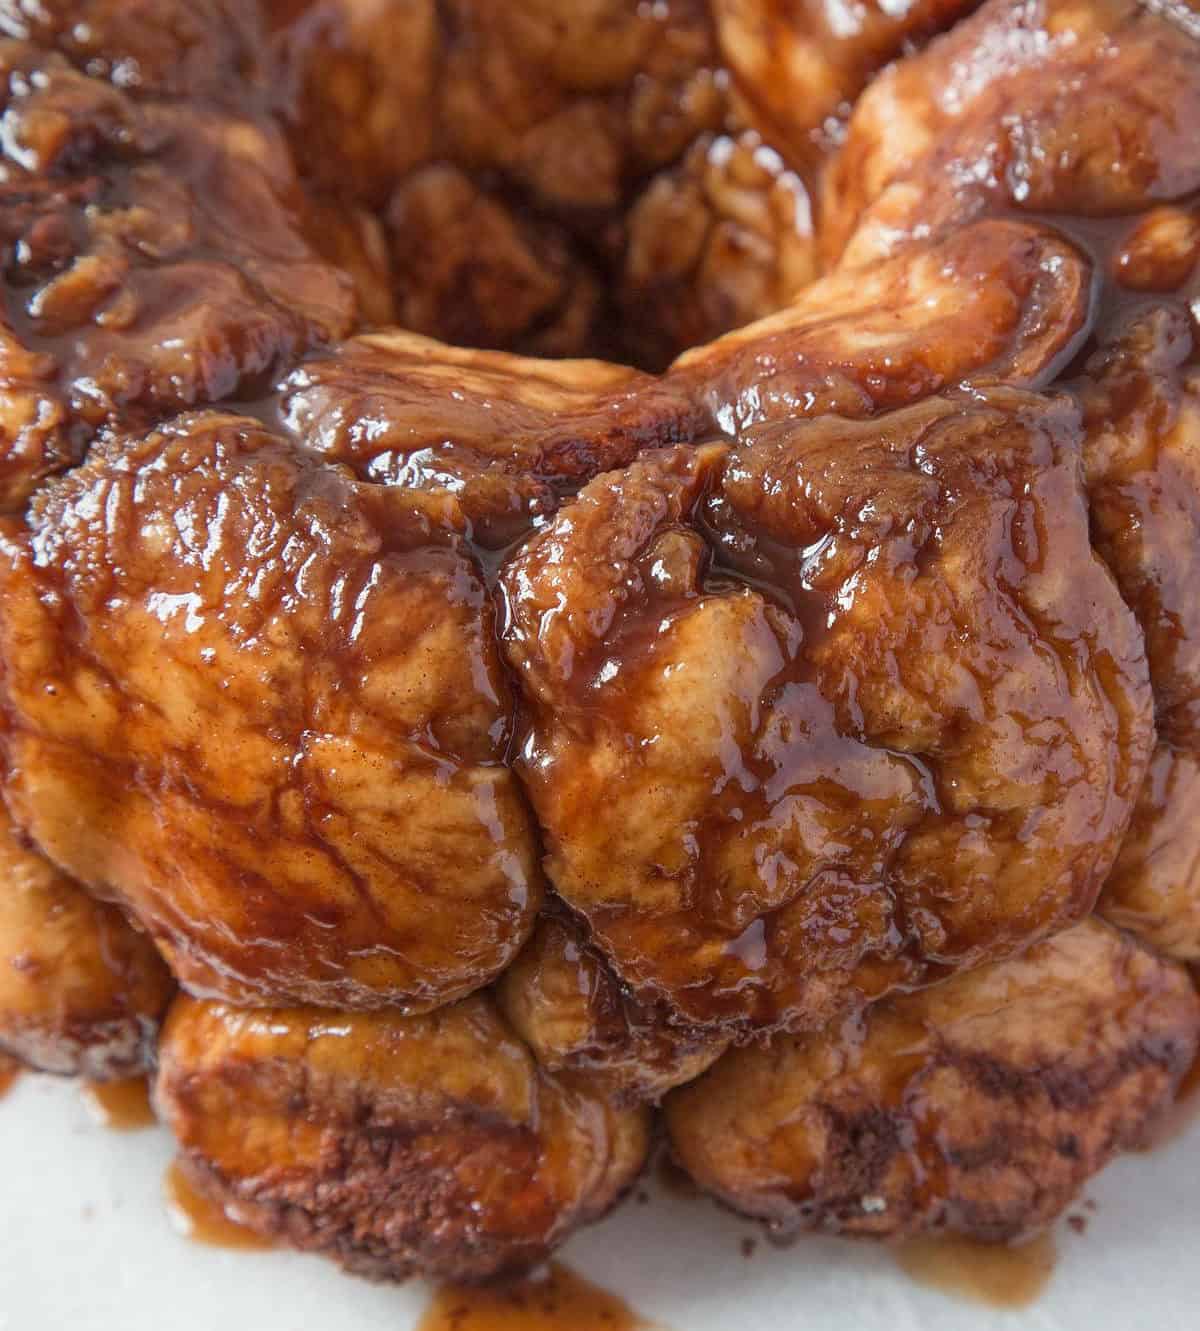  A perfect treat for a lazy Sunday brunch - Hershey's Chocolate Monkey Bread.